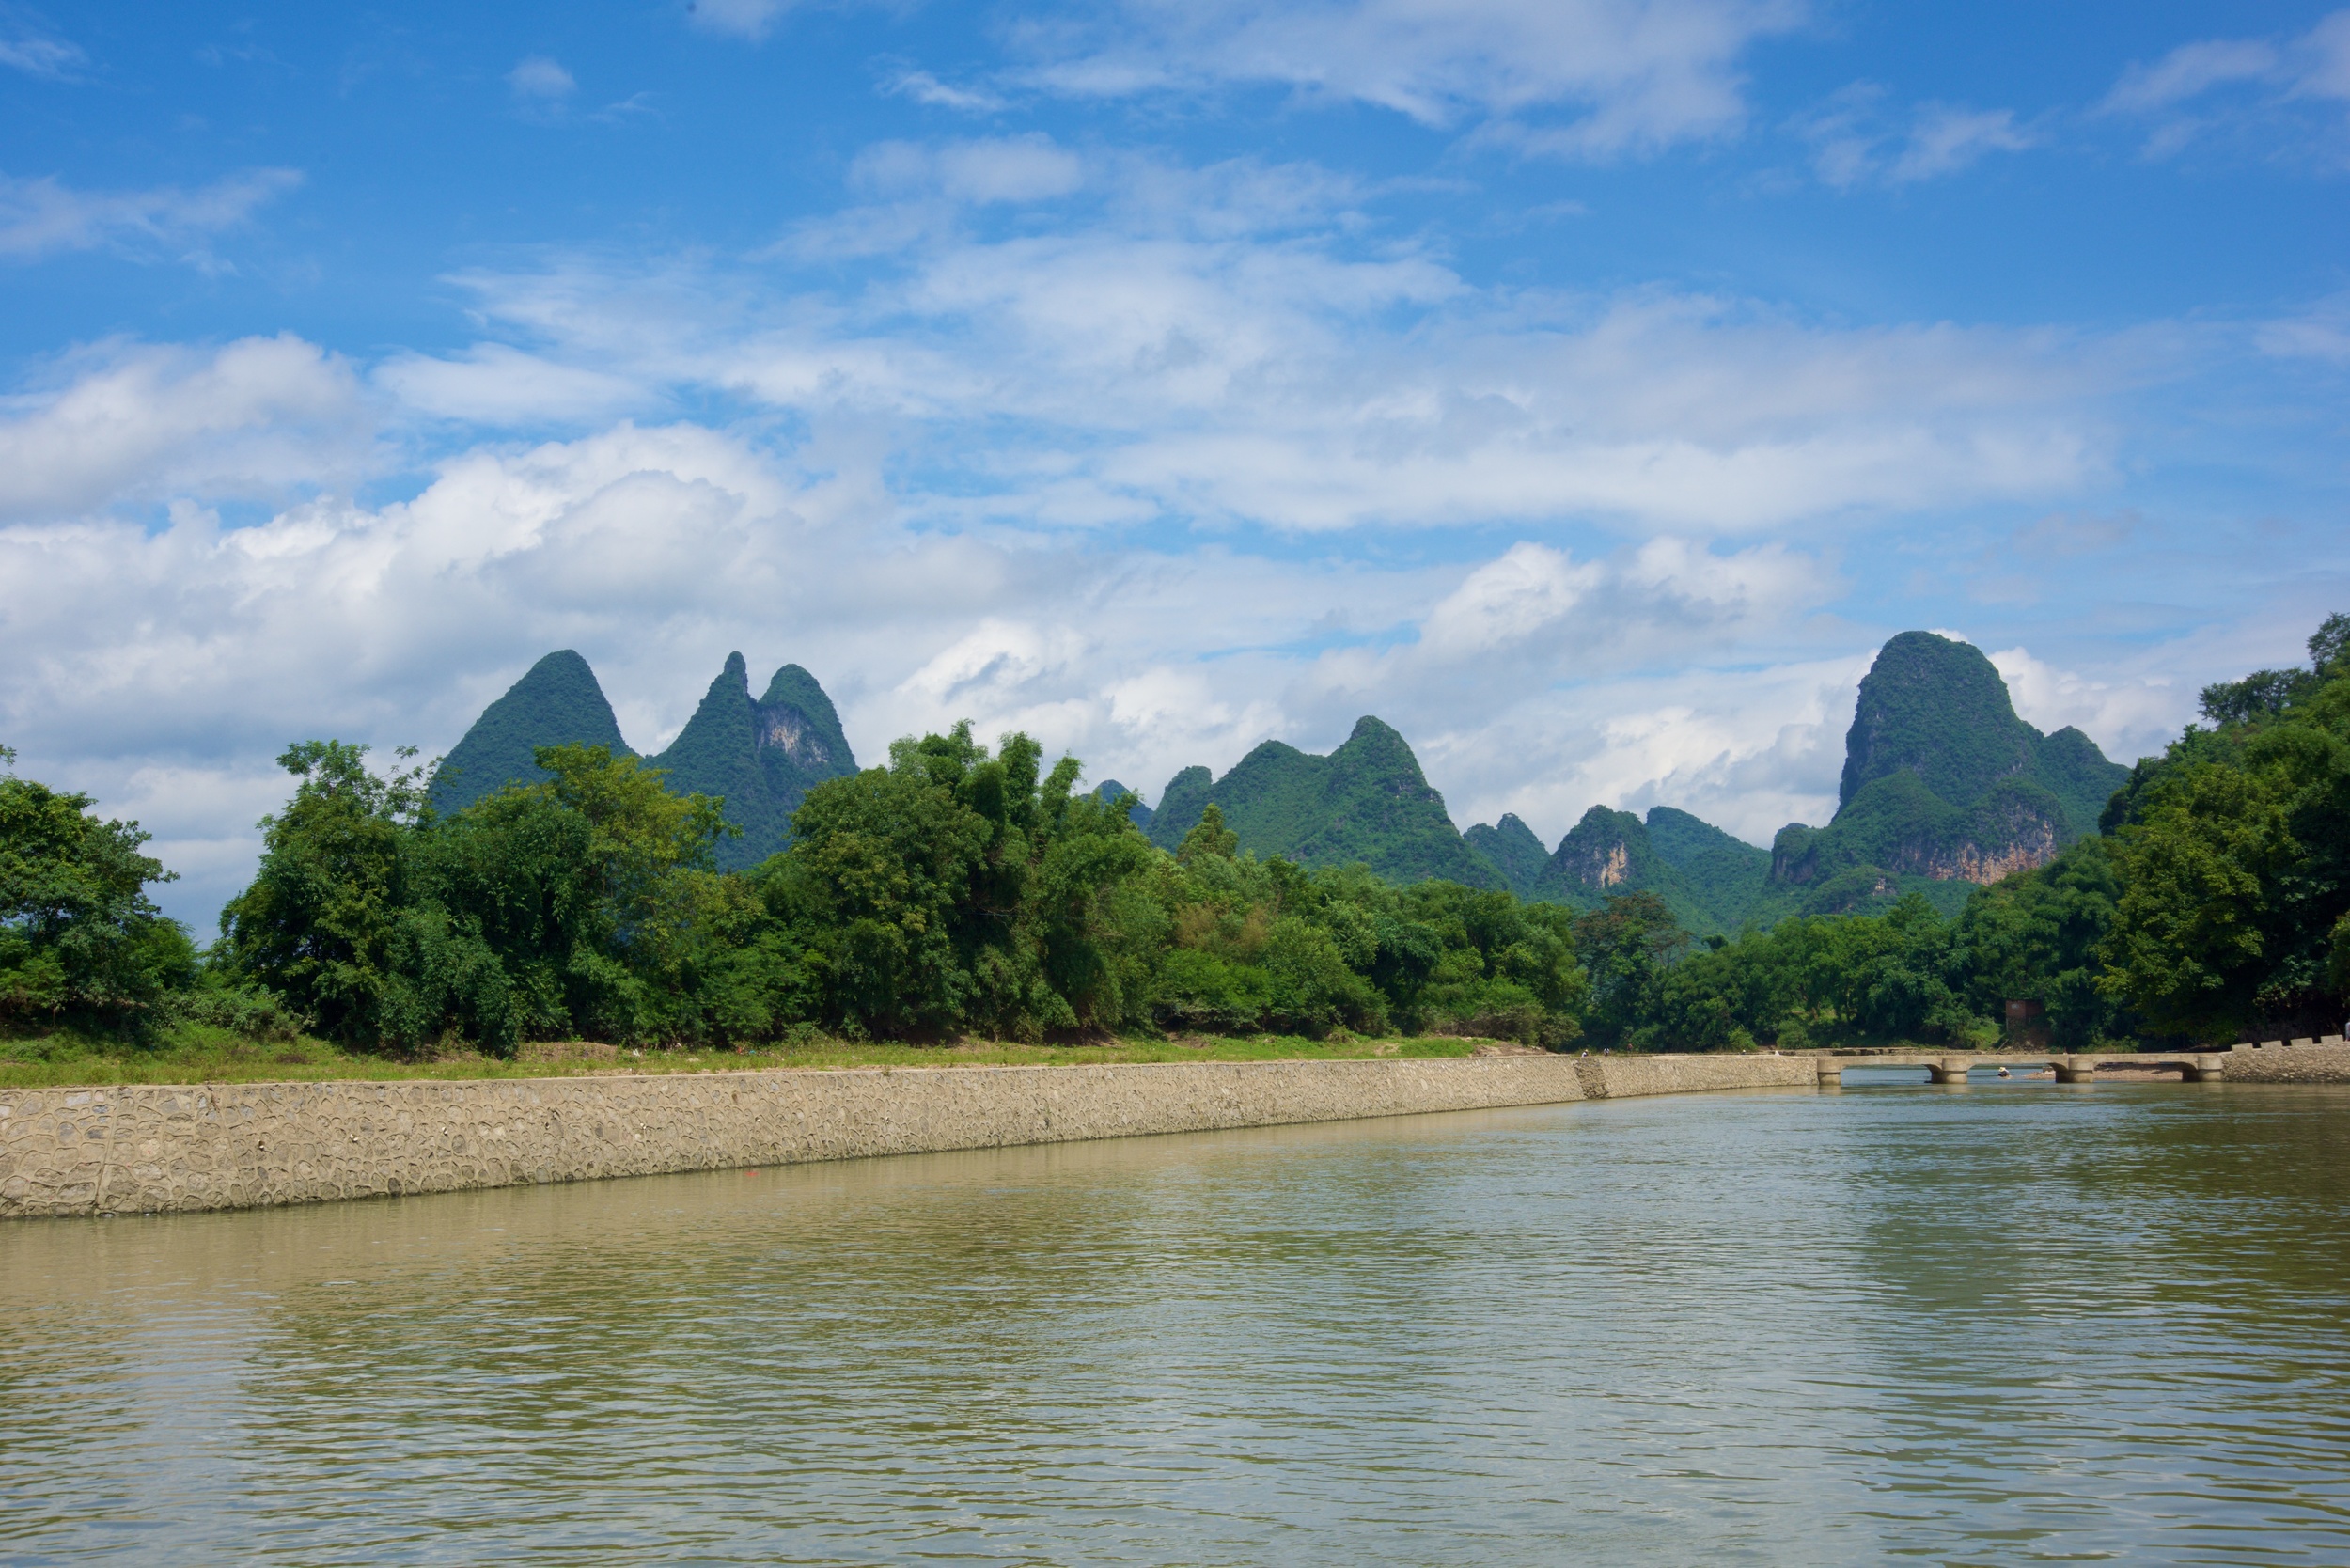  Karst mts from ferry terminal, Yangshuo 